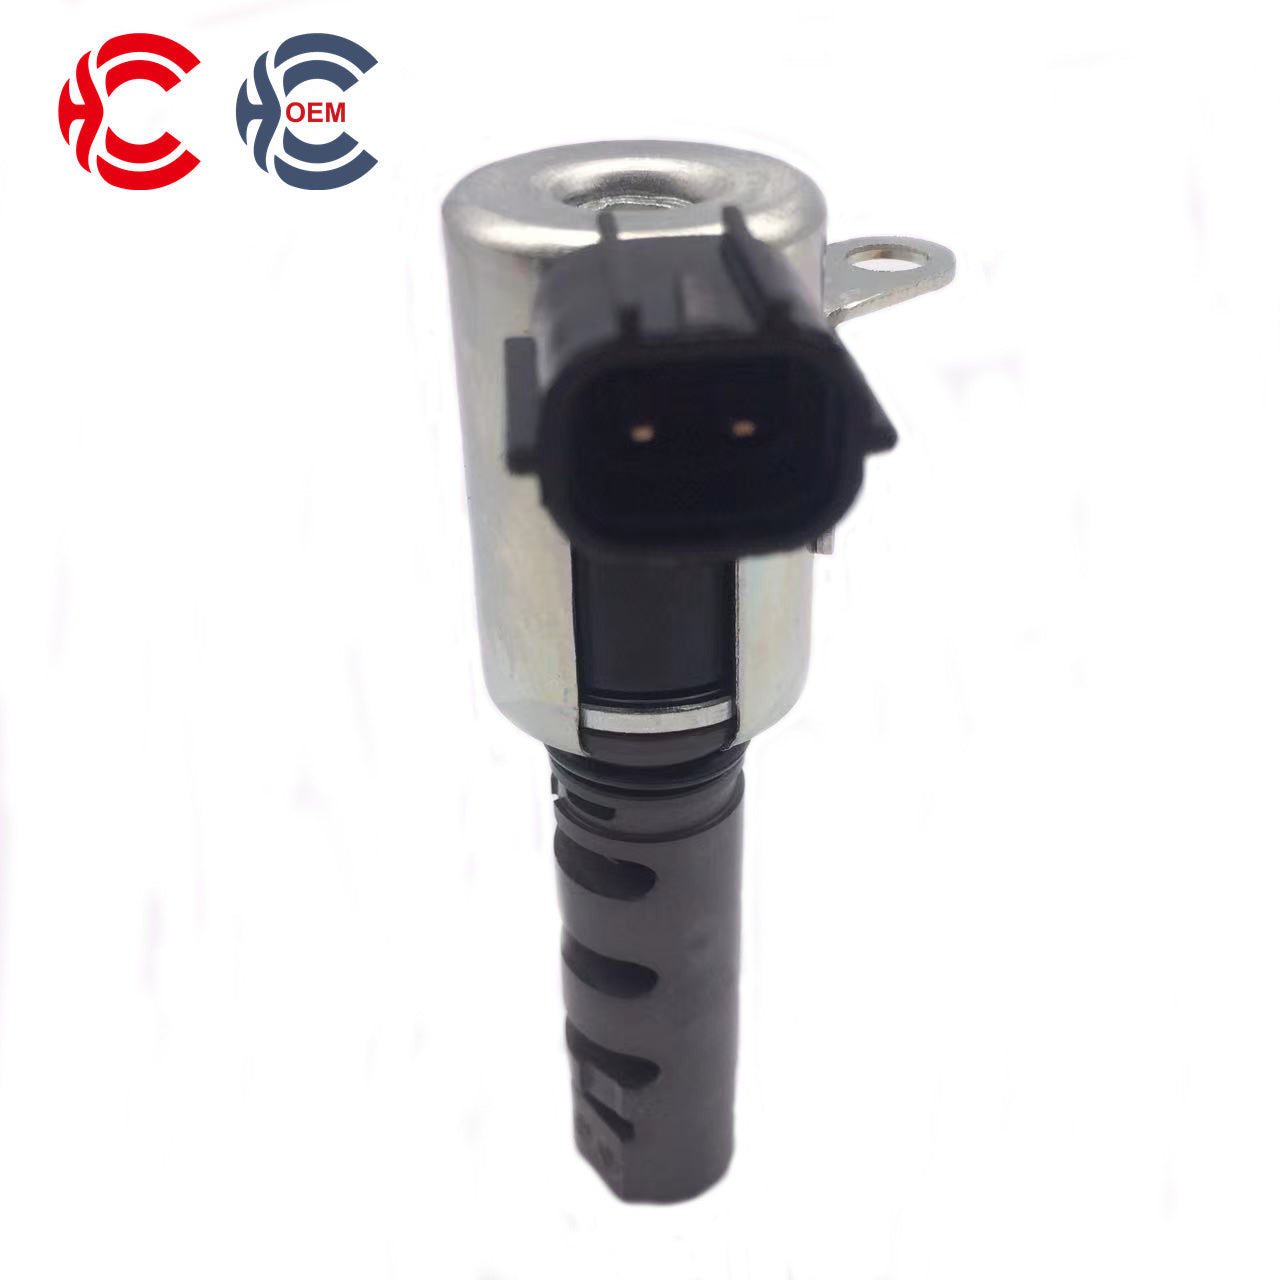 OEM: 15330-20010Material: ABS metalColor: black silverOrigin: Made in ChinaWeight: 300gPacking List: 1* VVT Solenoid Valve More ServiceWe can provide OEM Manufacturing serviceWe can Be your one-step solution for Auto PartsWe can provide technical scheme for you Feel Free to Contact Us, We will get back to you as soon as possible.